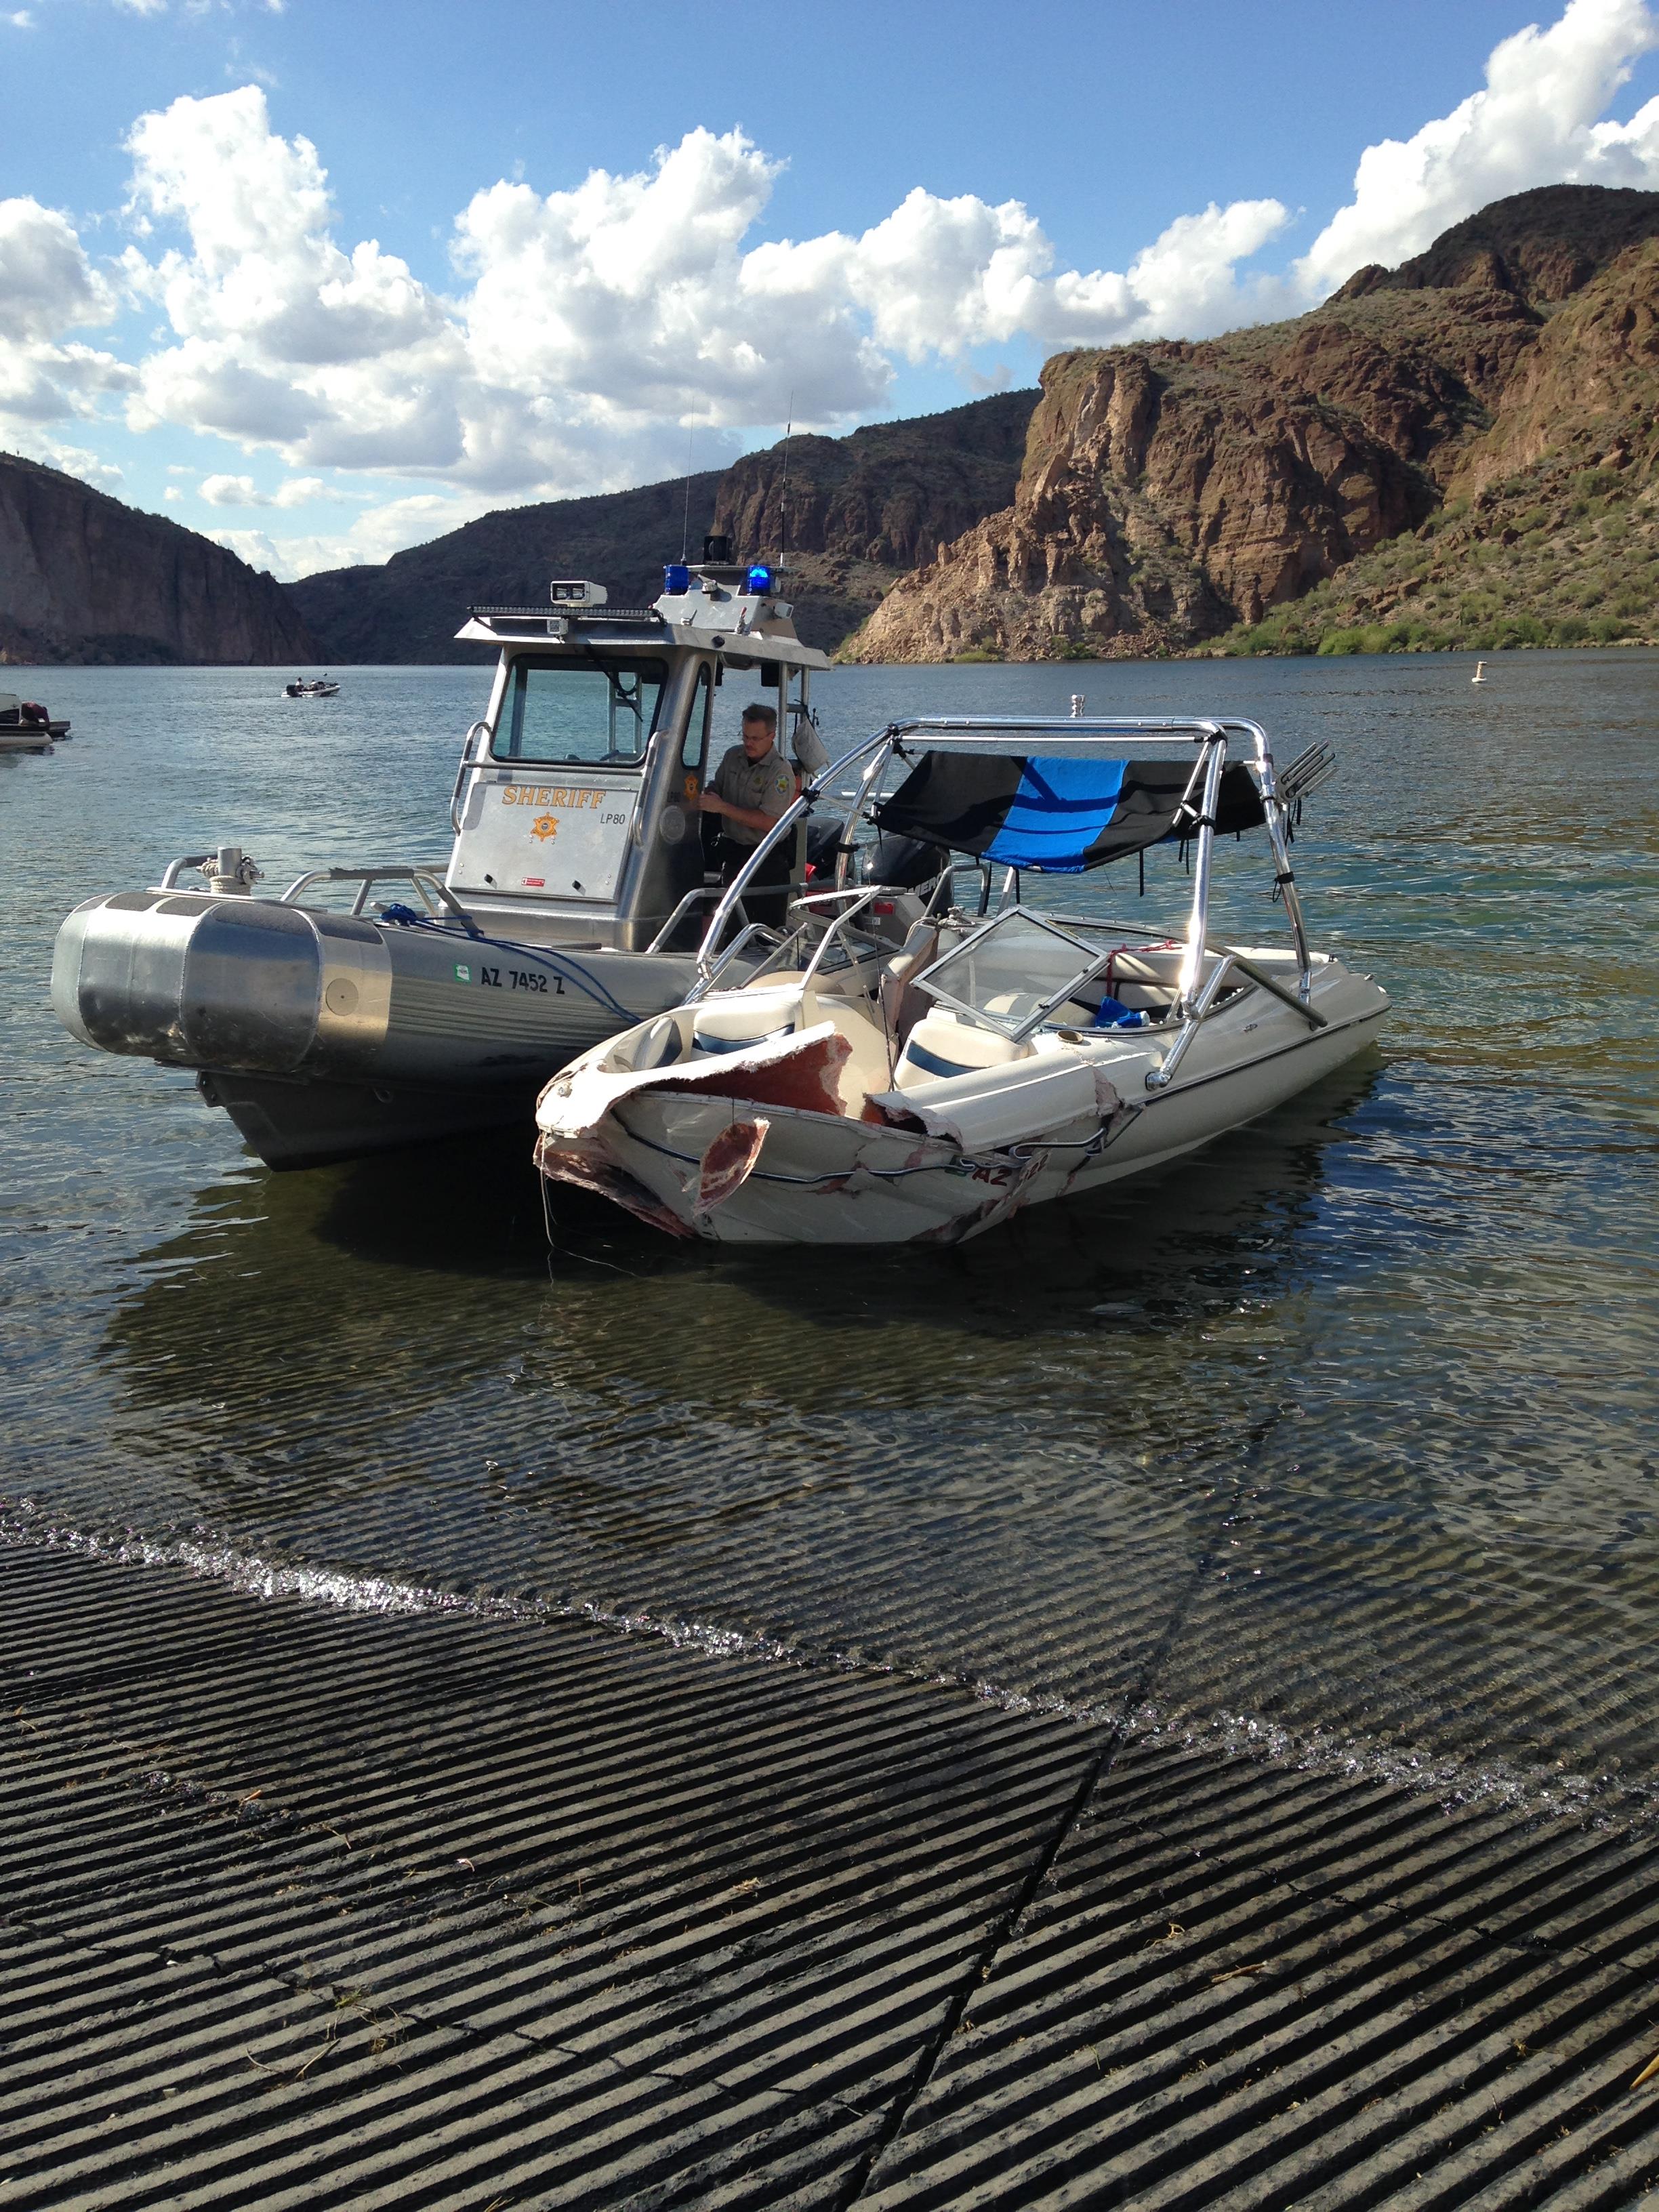 One dead in boating accident at Canyon Lake